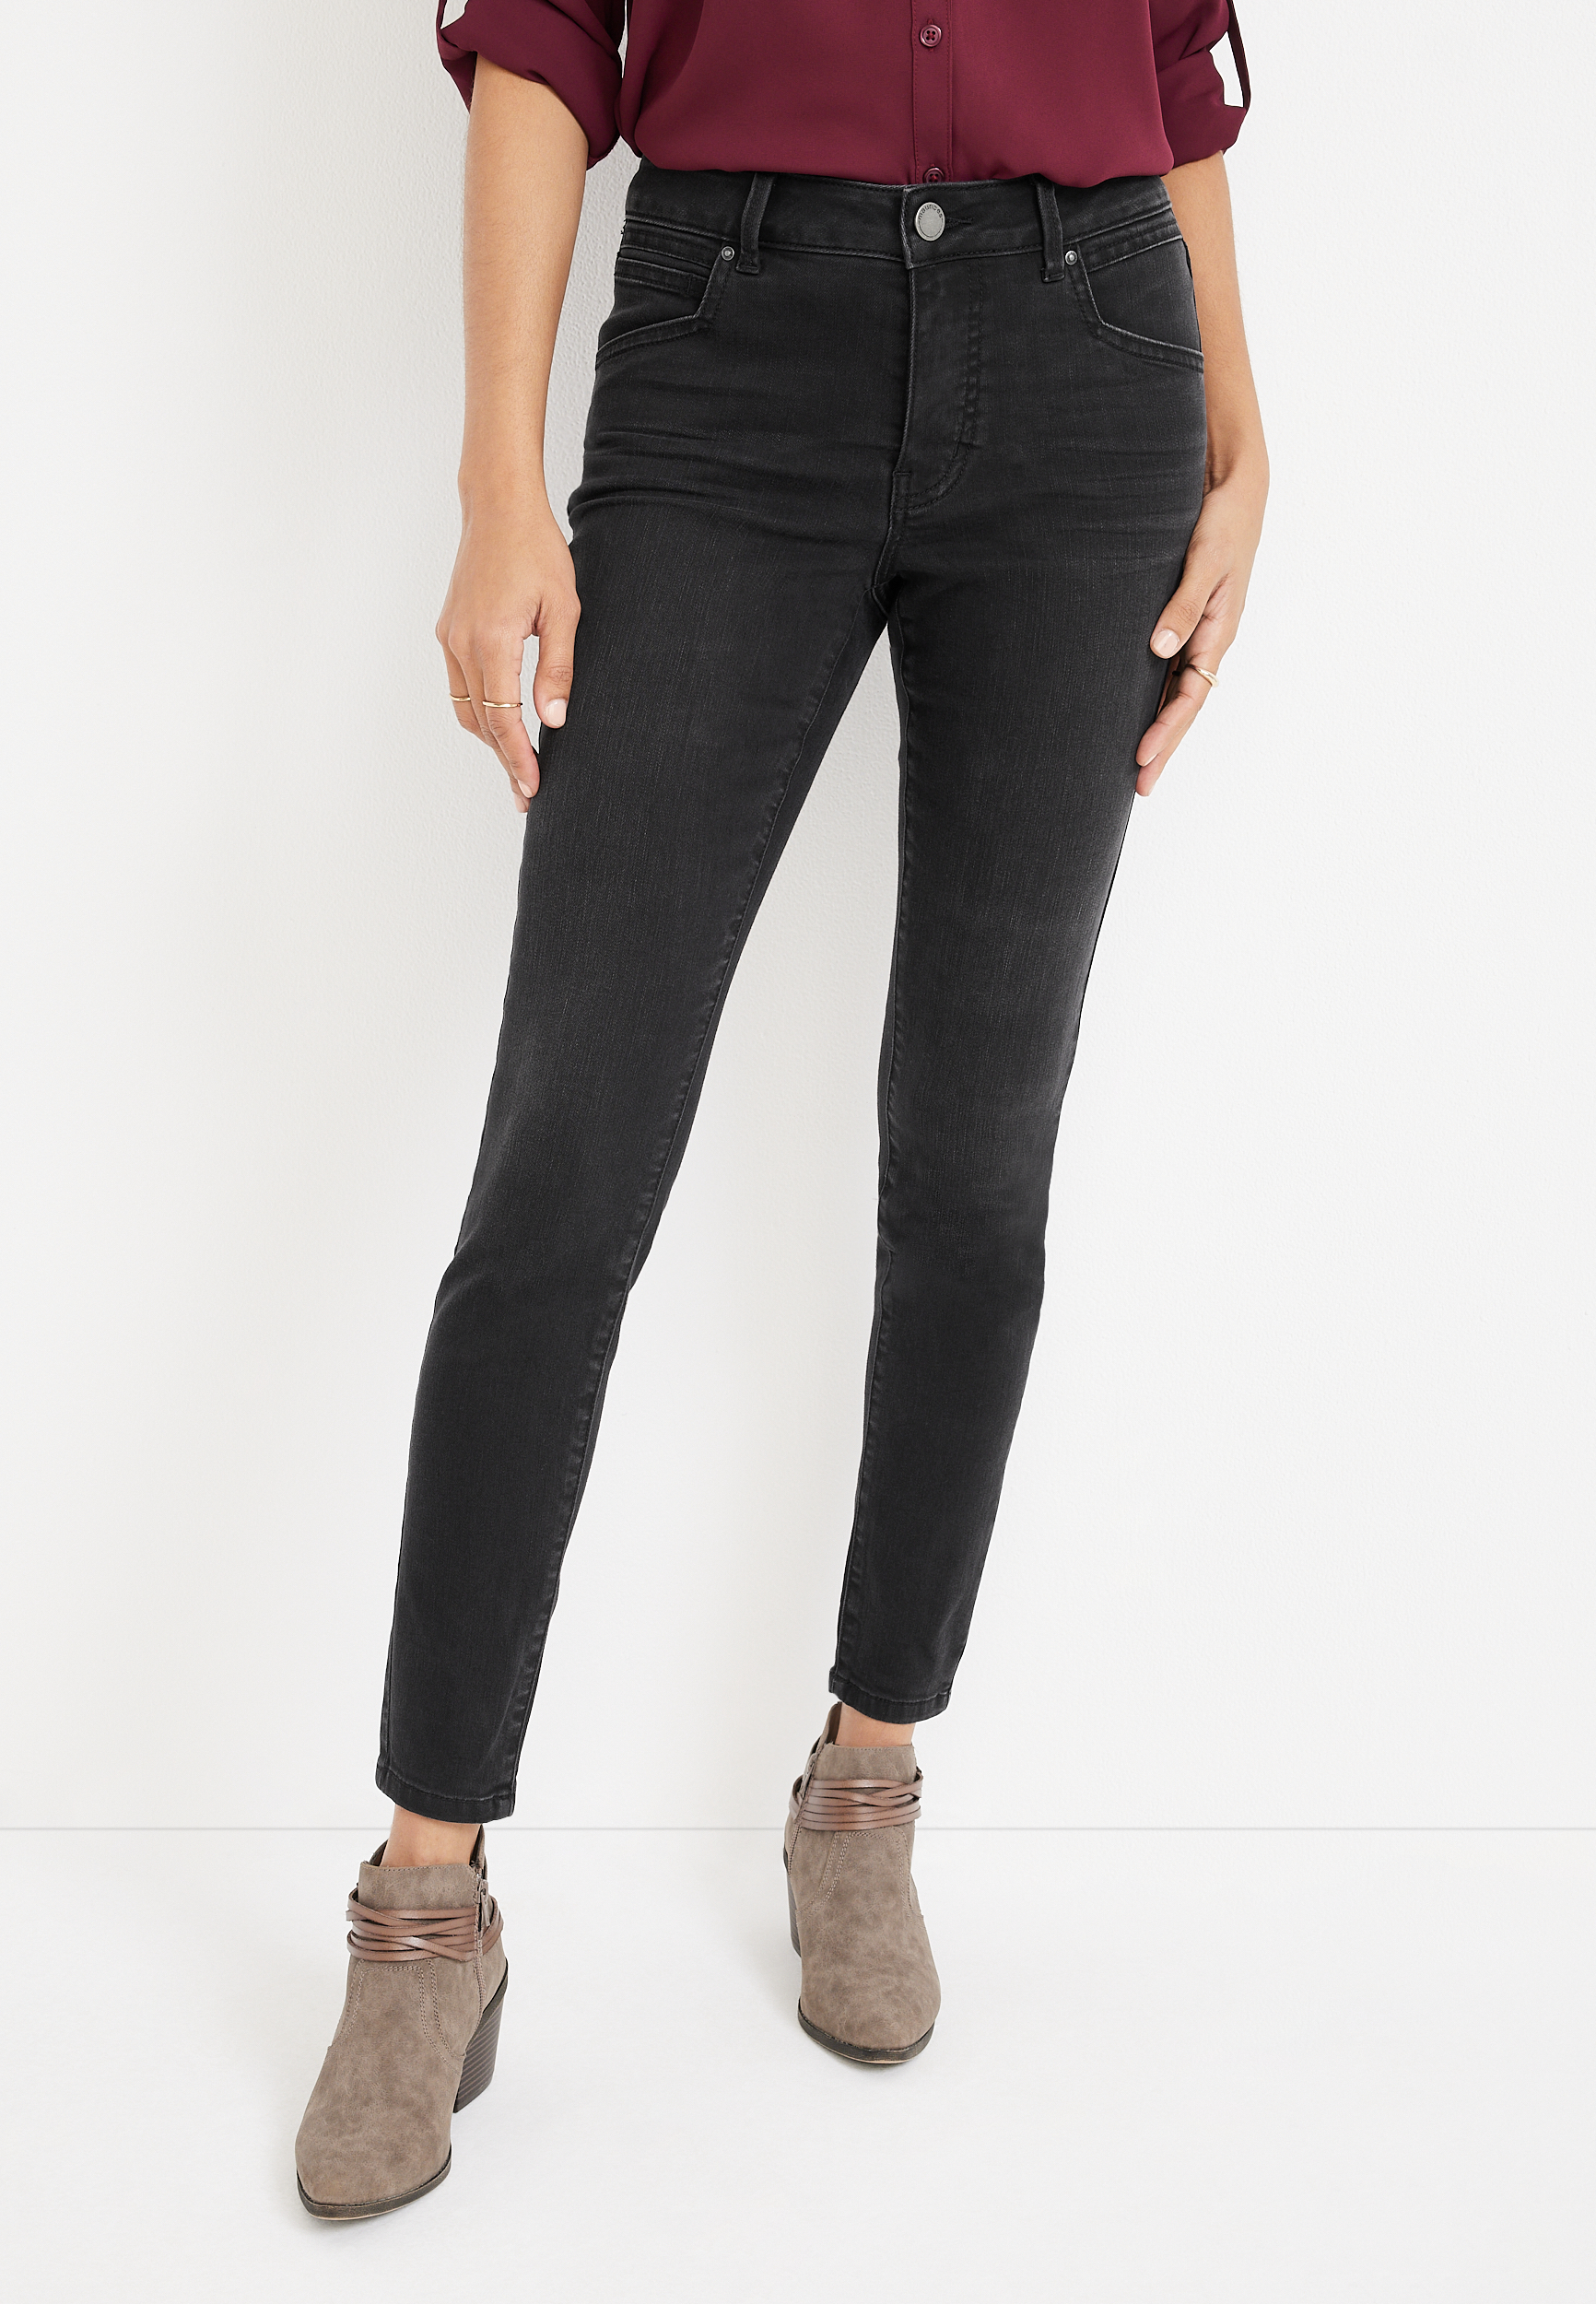 m jeans by maurices™ Everflex™ Super Skinny Curvy High Rise Jean | maurices